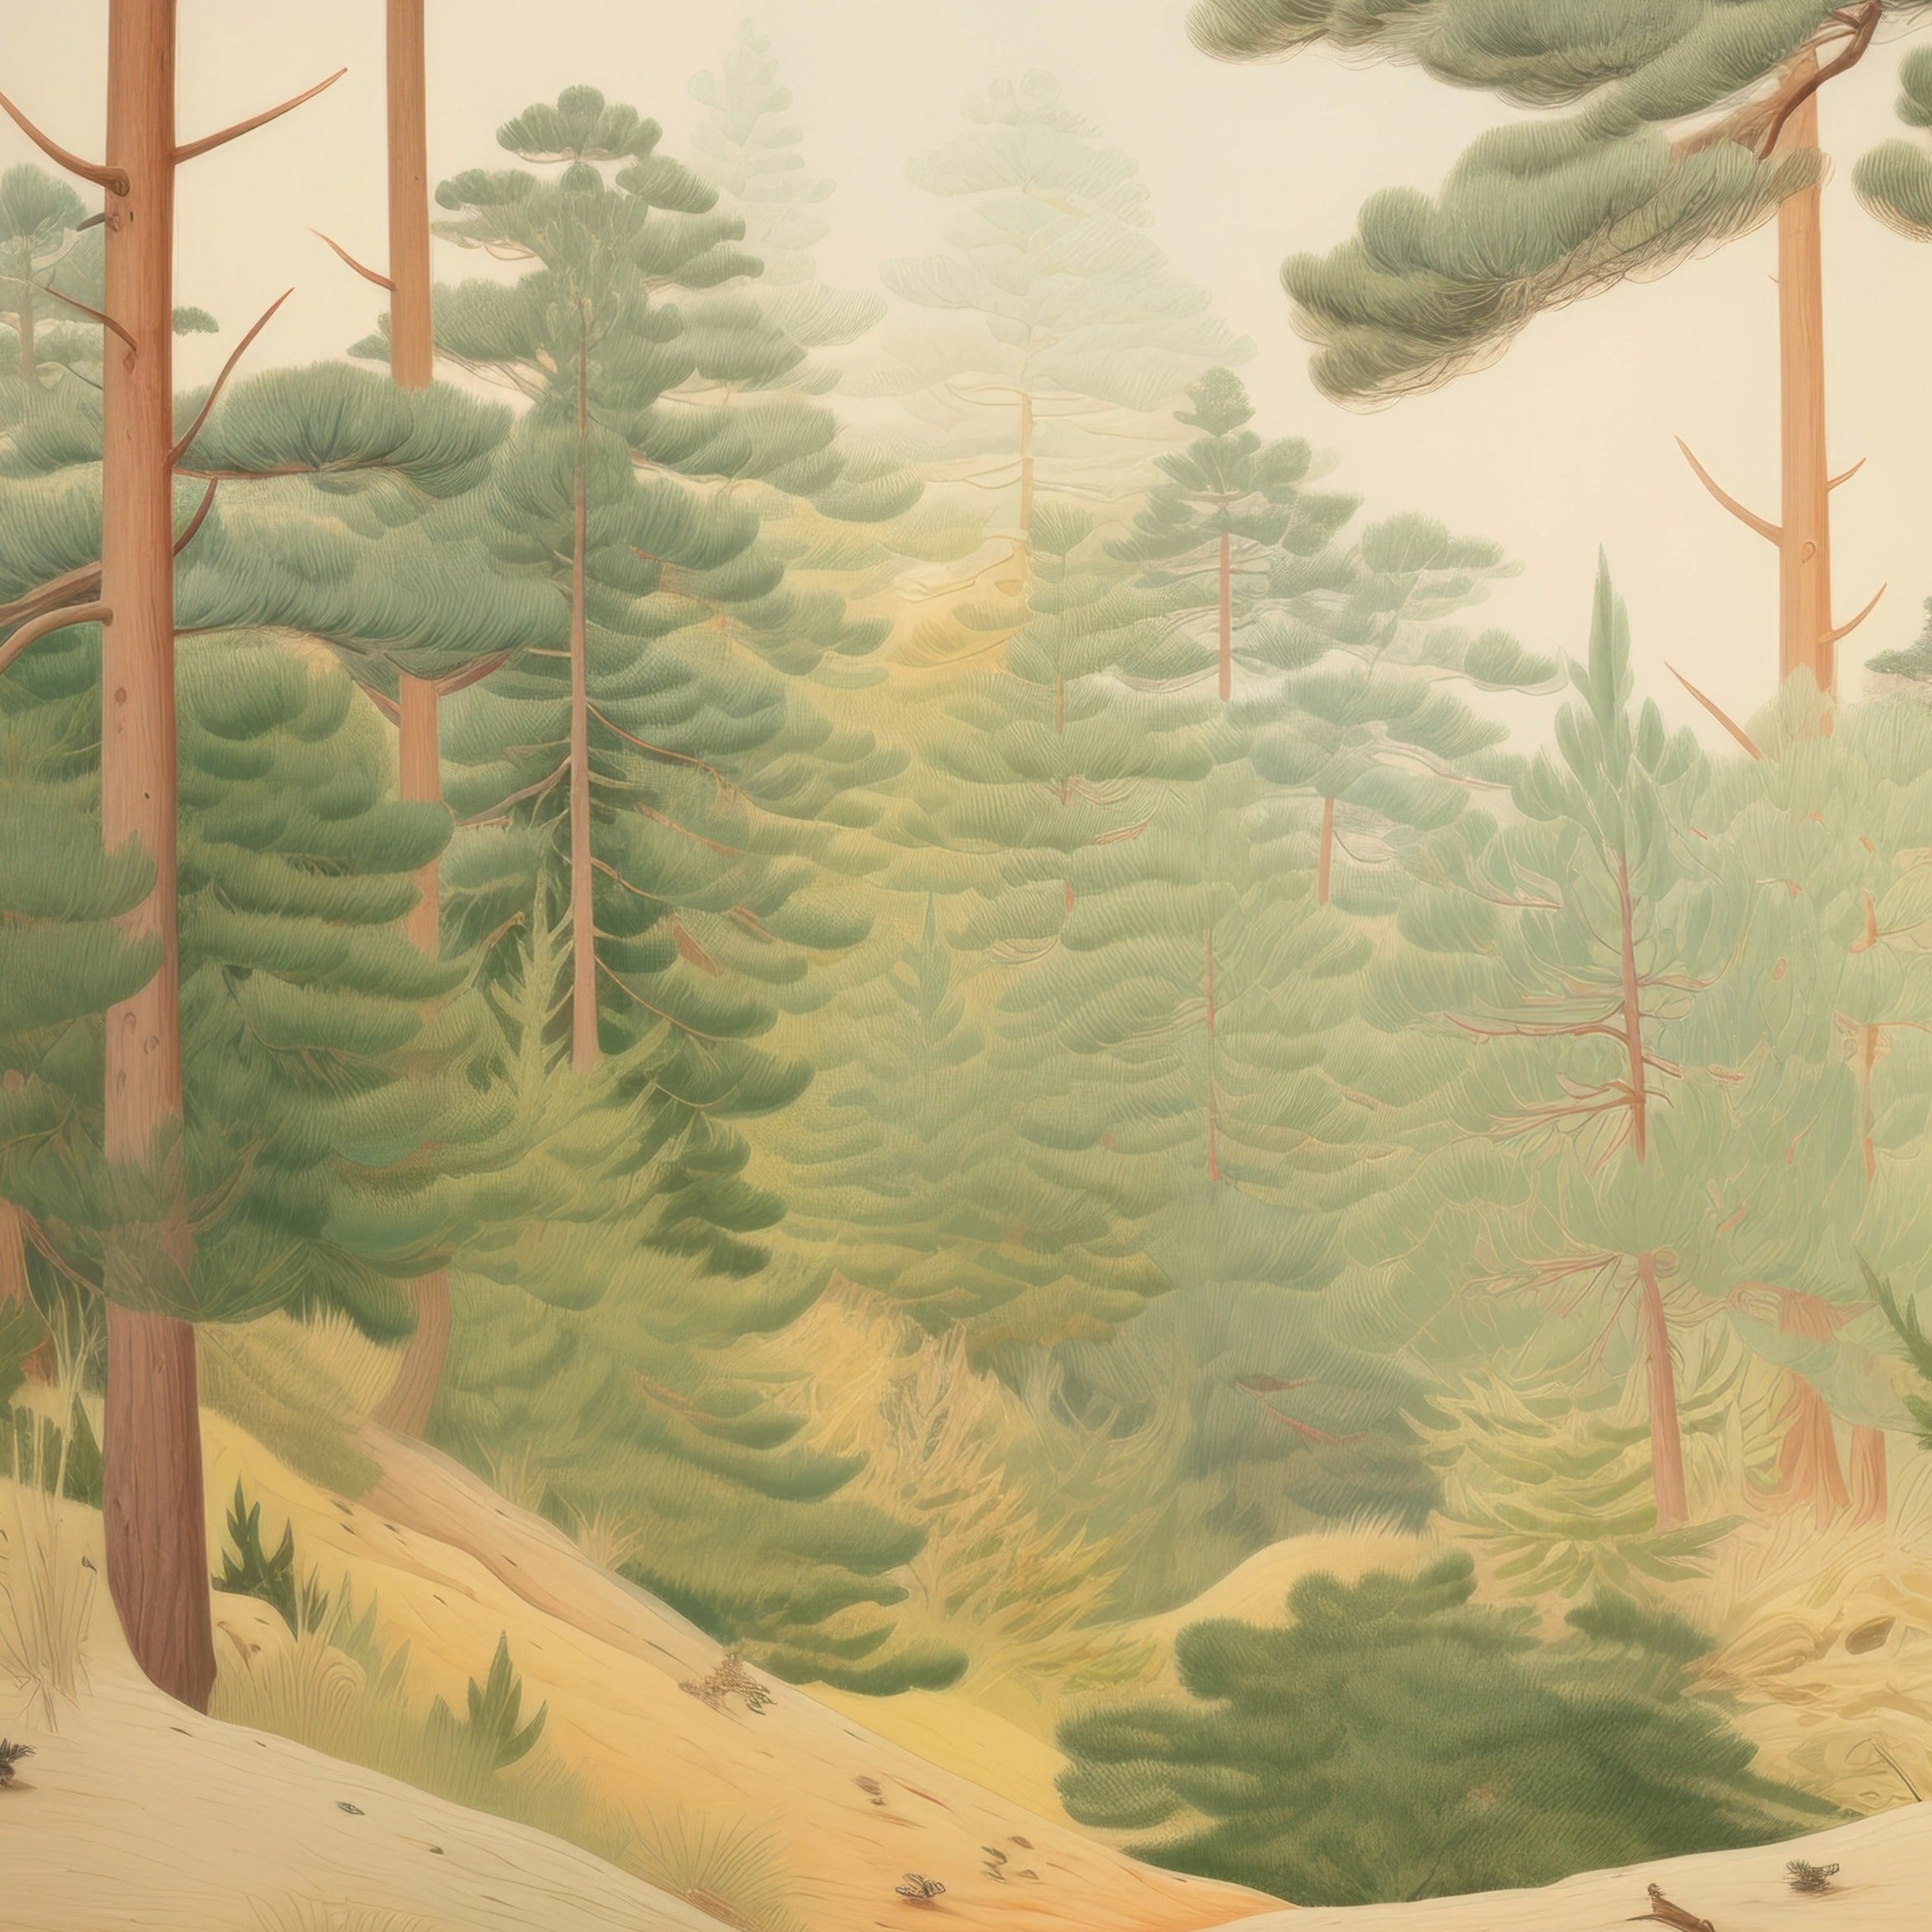 Room featuring the 'Gila Forest Mural' depicting a dense pine forest with towering trees under a serene sky, creating a tranquil atmosphere."